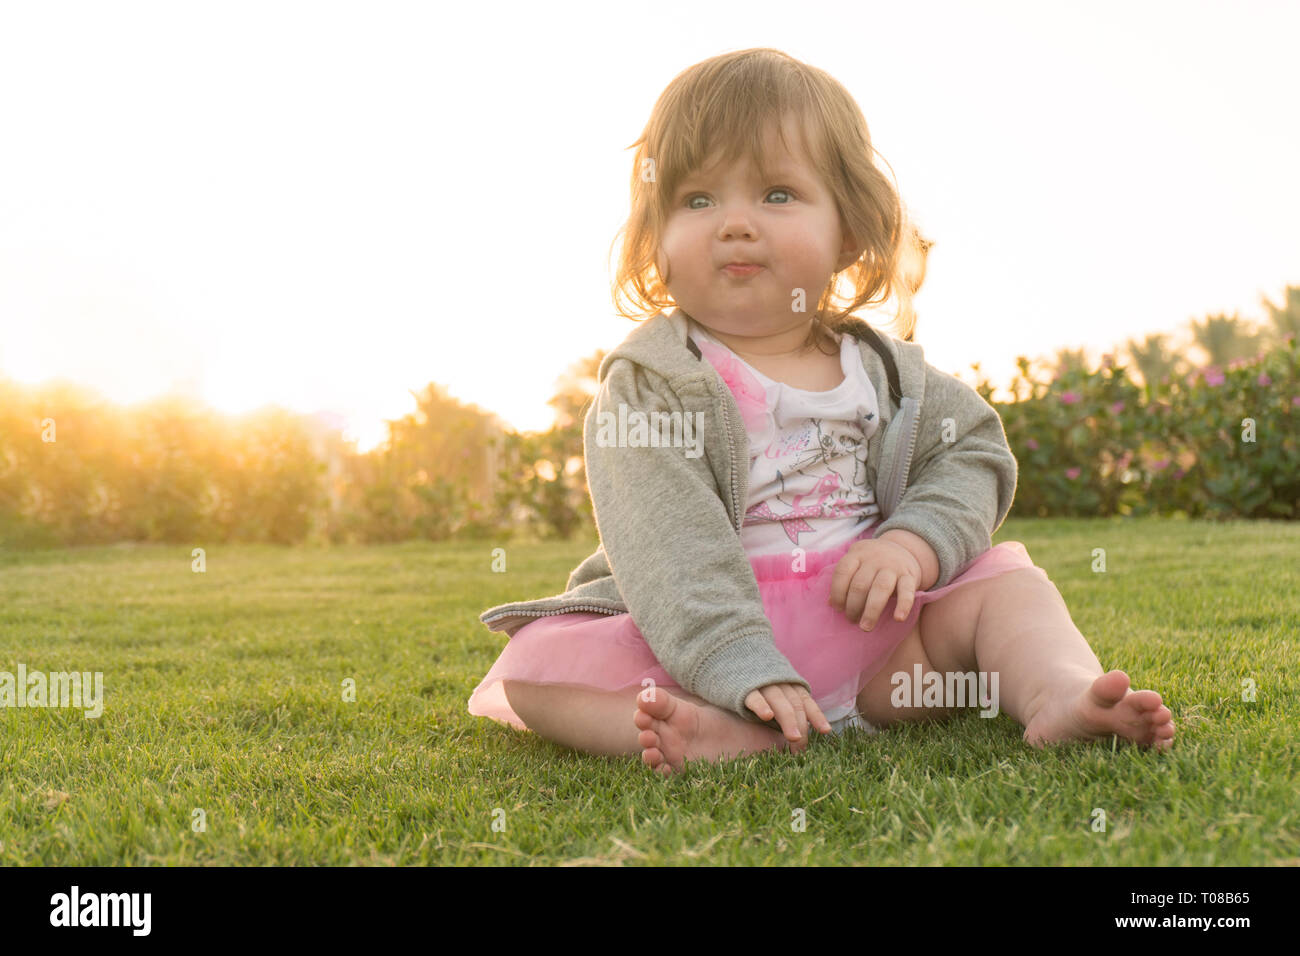 Funny little girl sitting on grass on vacation Stock Photo